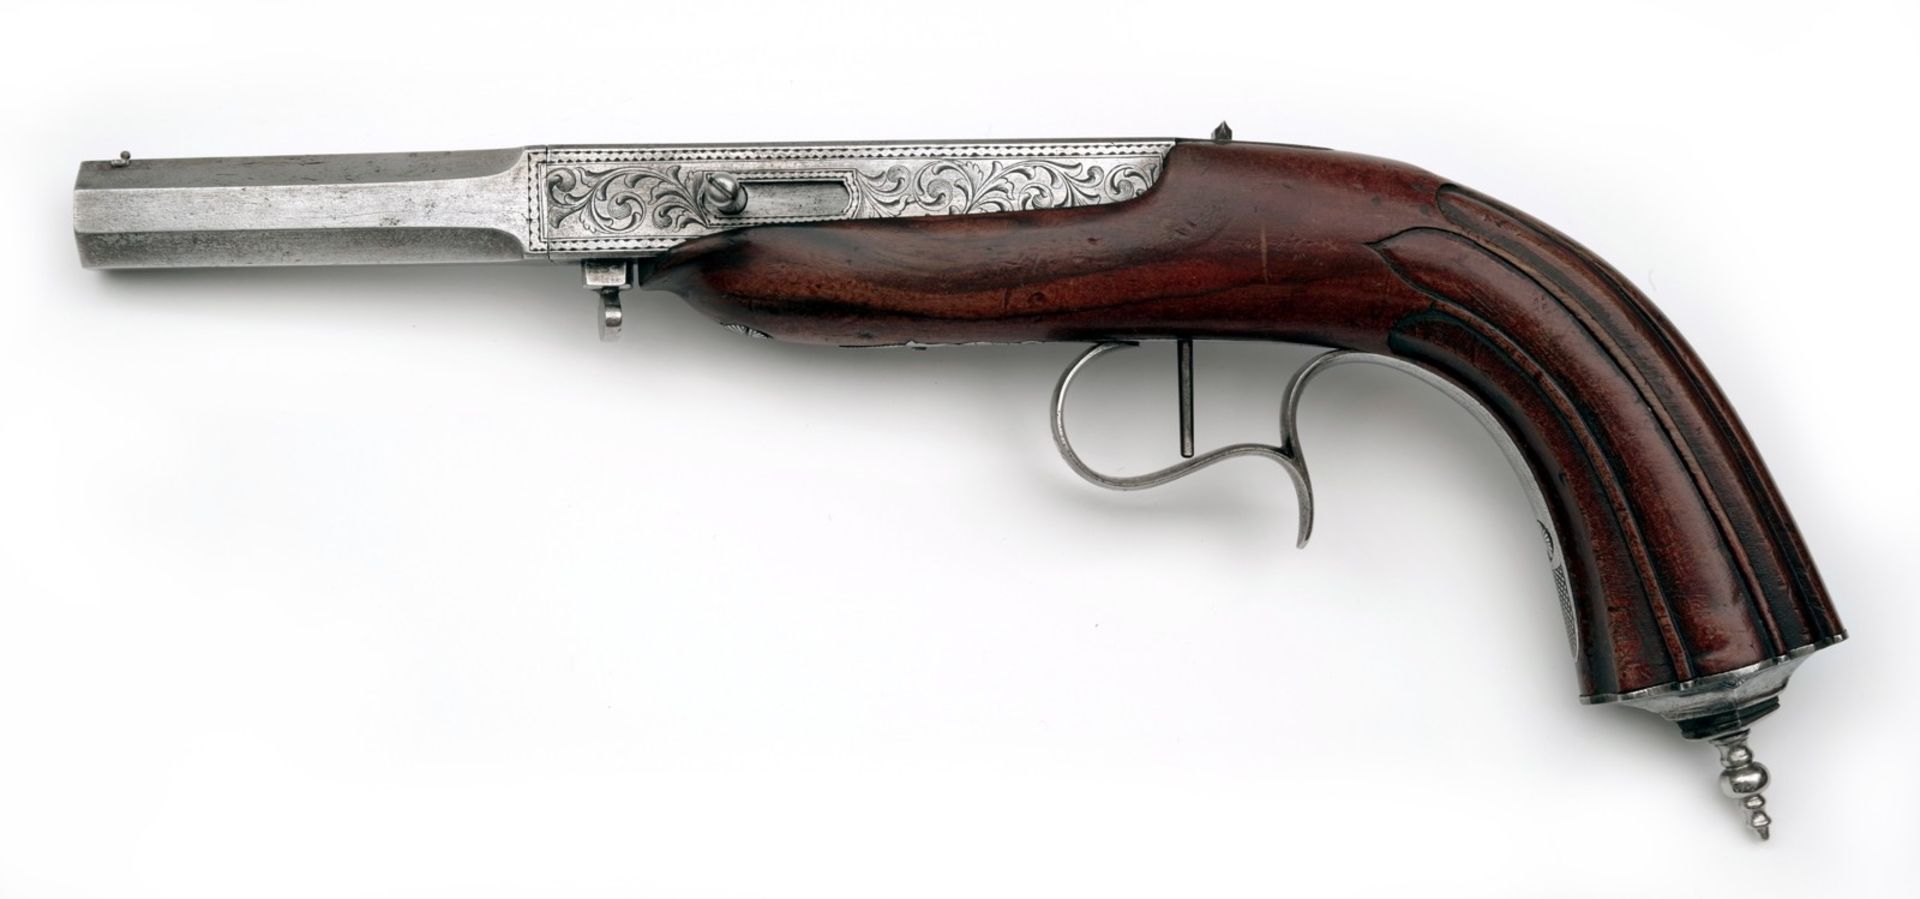 A Percussion Cased Parlor Pistol with Interchangeable Barrels - Image 4 of 8